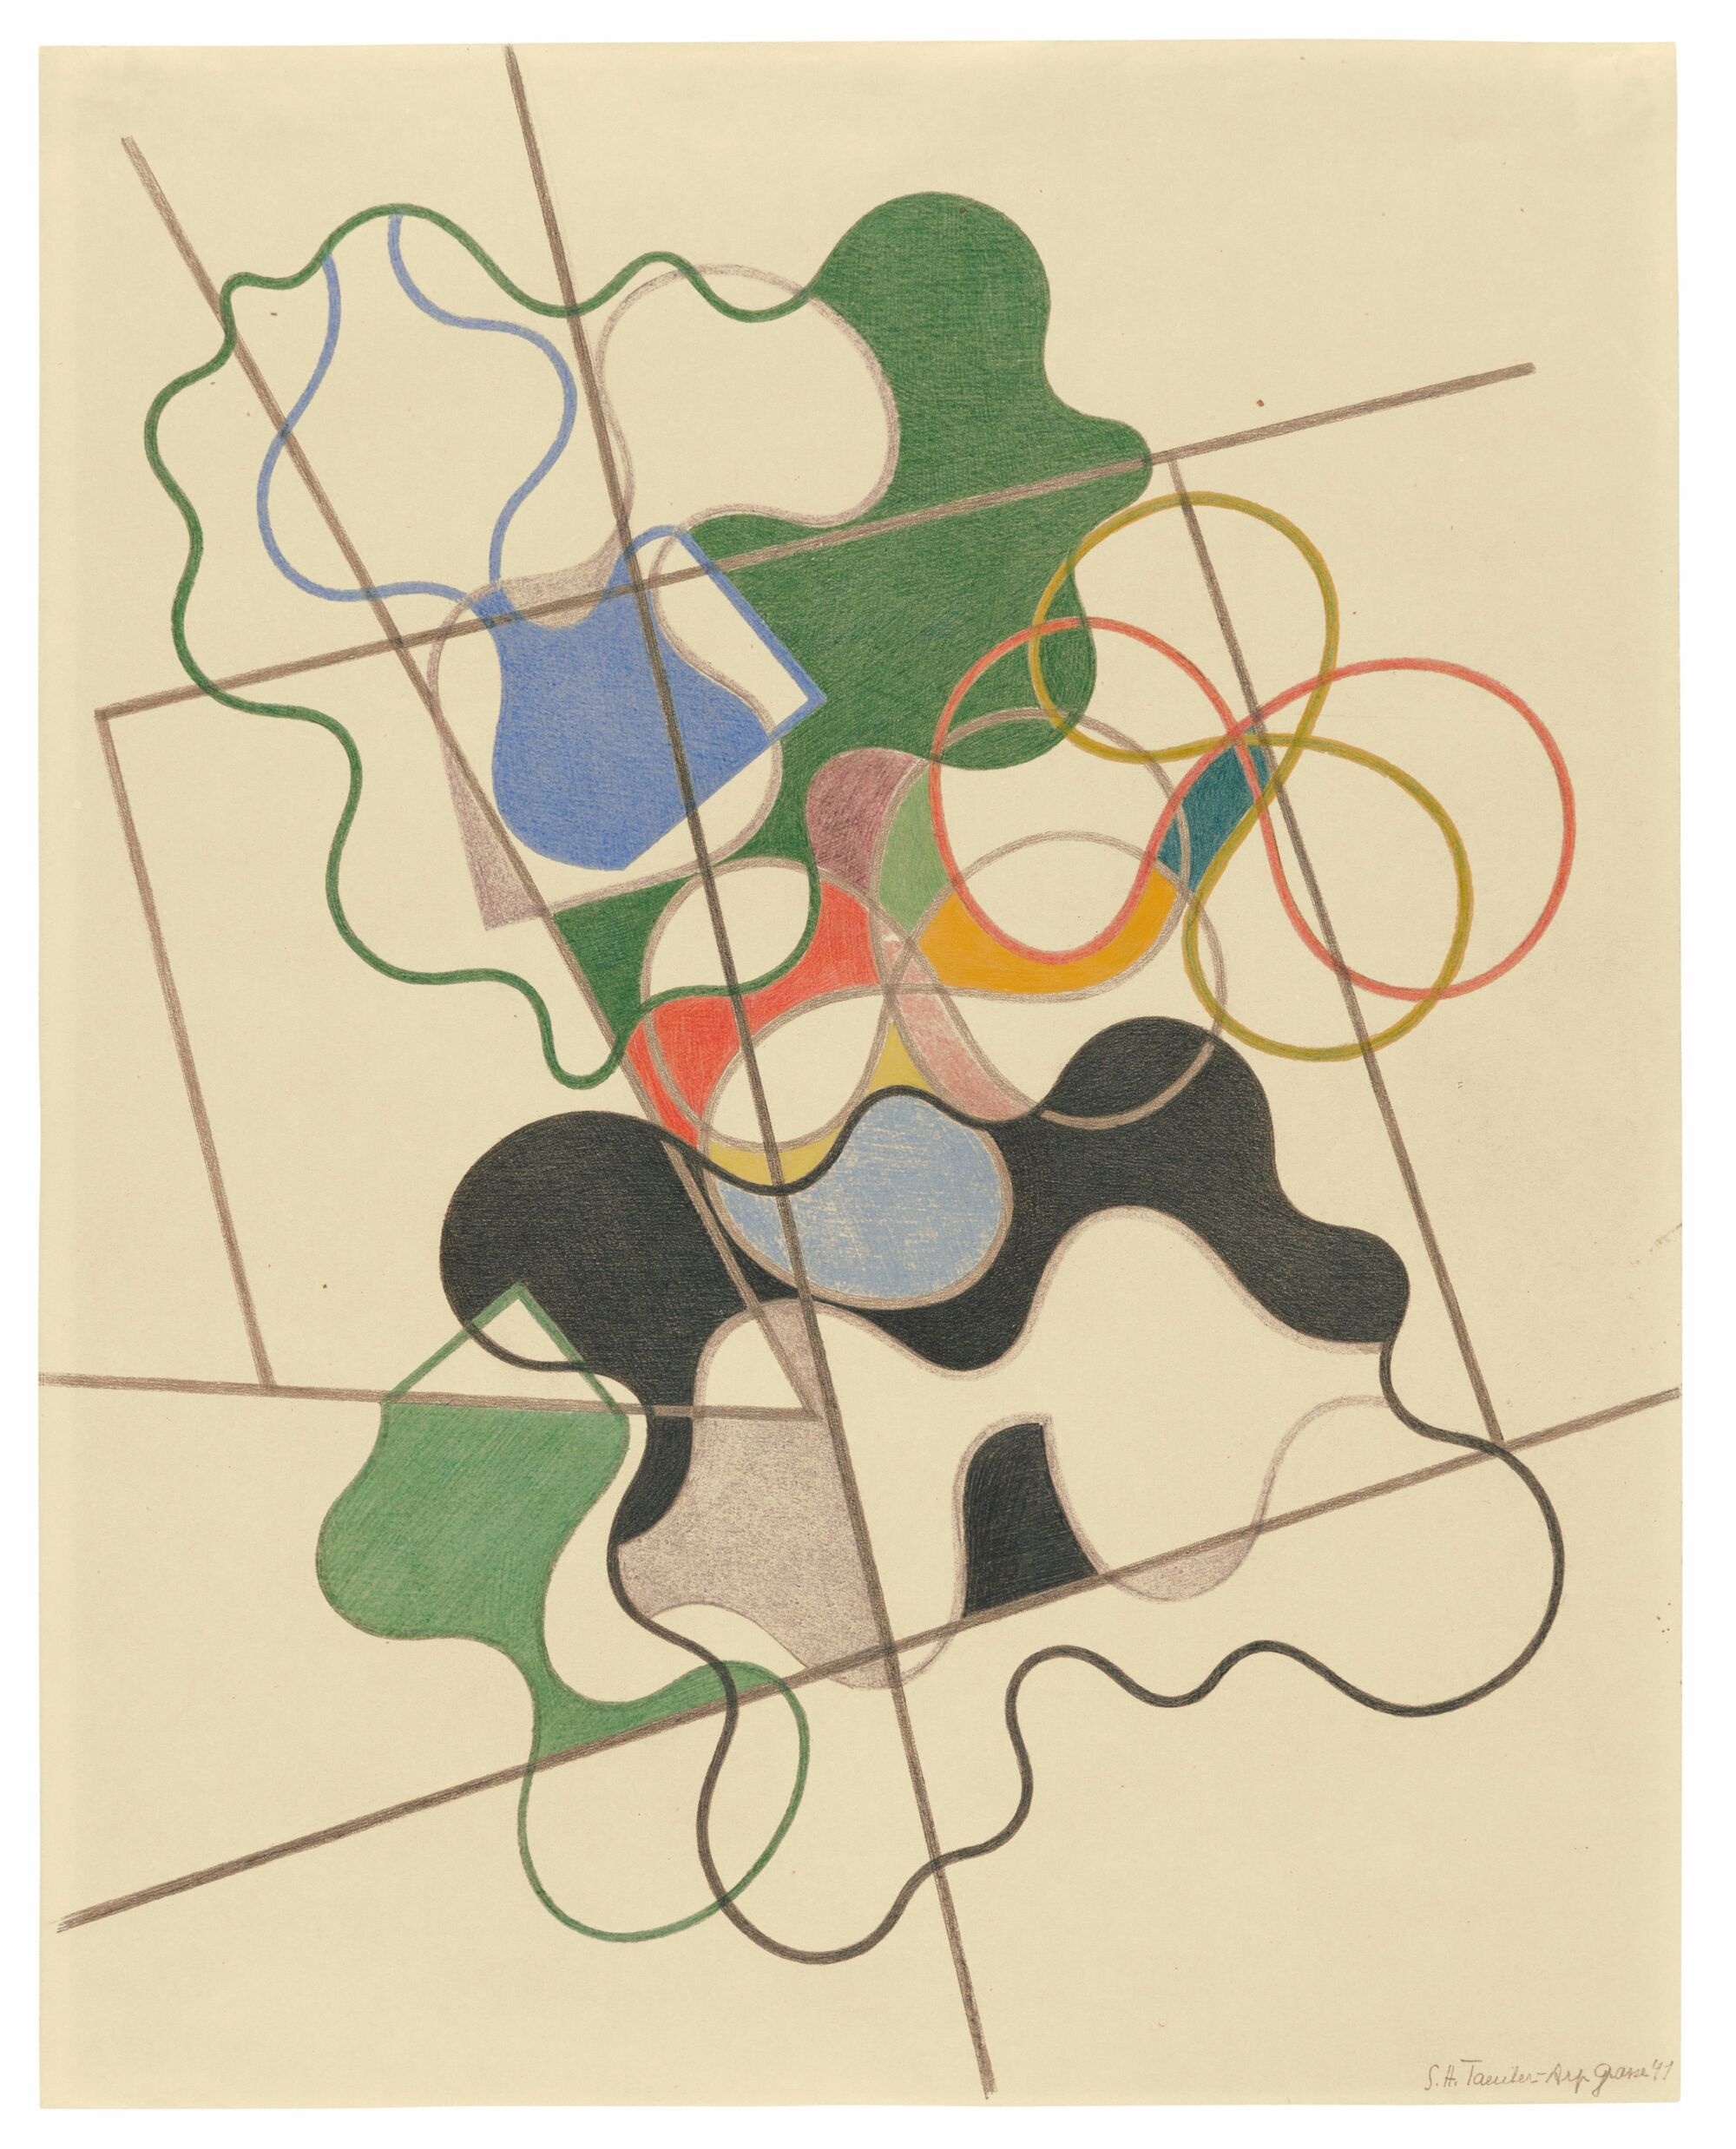 The Wick - Sophie Taeuber-Arp, Geometric and undulating, 1941